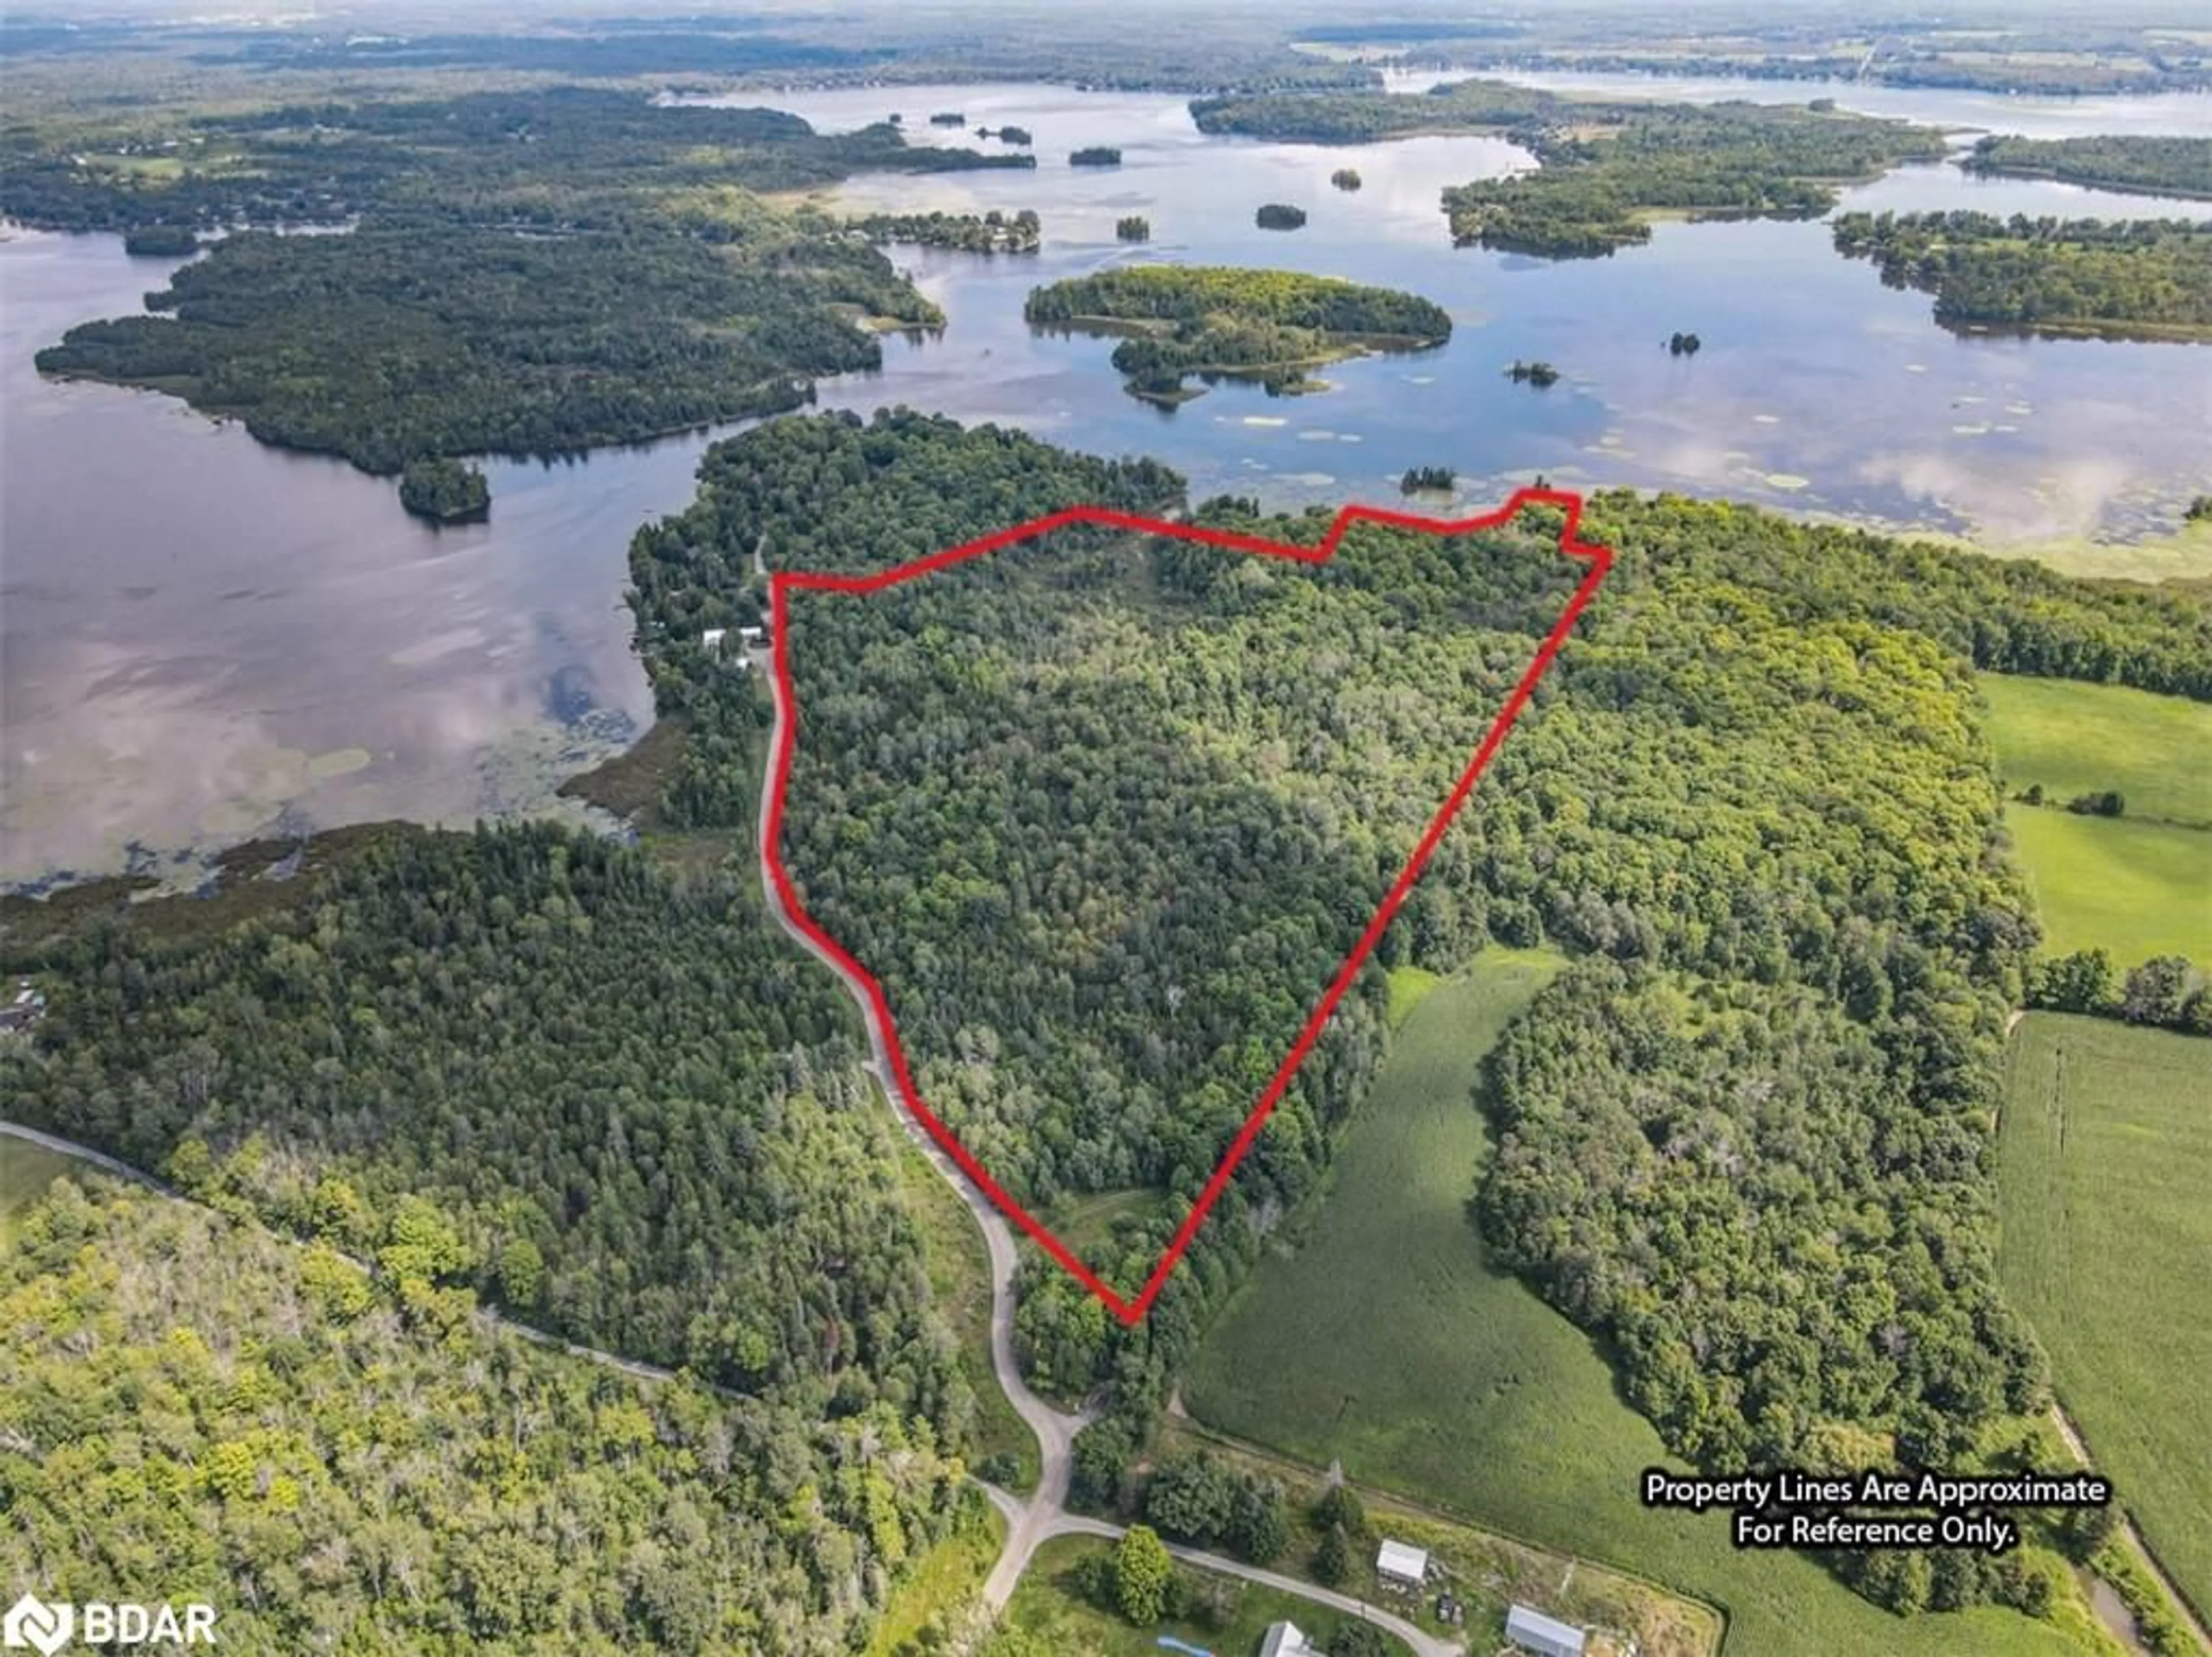 Lakeview for N/A Birch Point Rd, Trent Hills Ontario K0L 1Y0